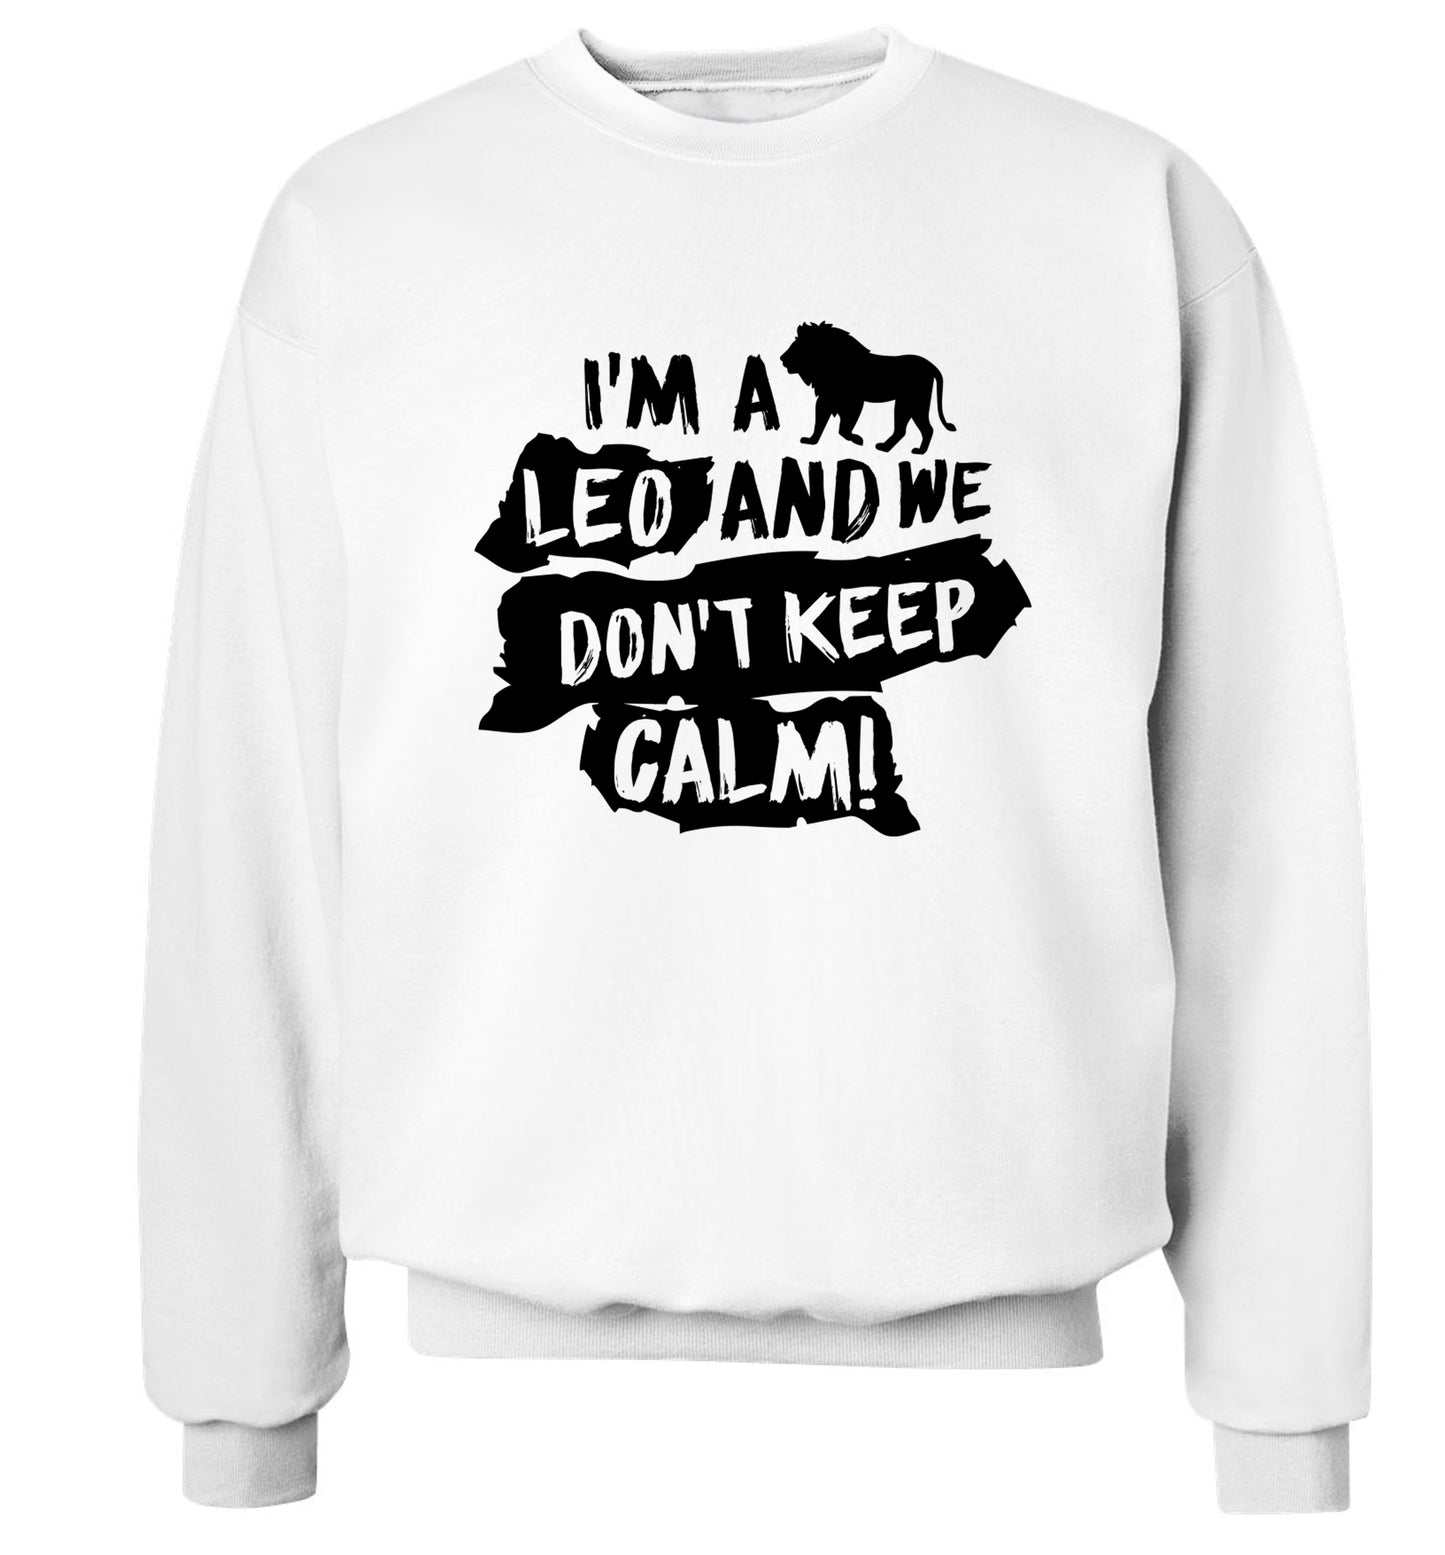 I'm a leo and we don't keep calm! Adult's unisex white Sweater 2XL